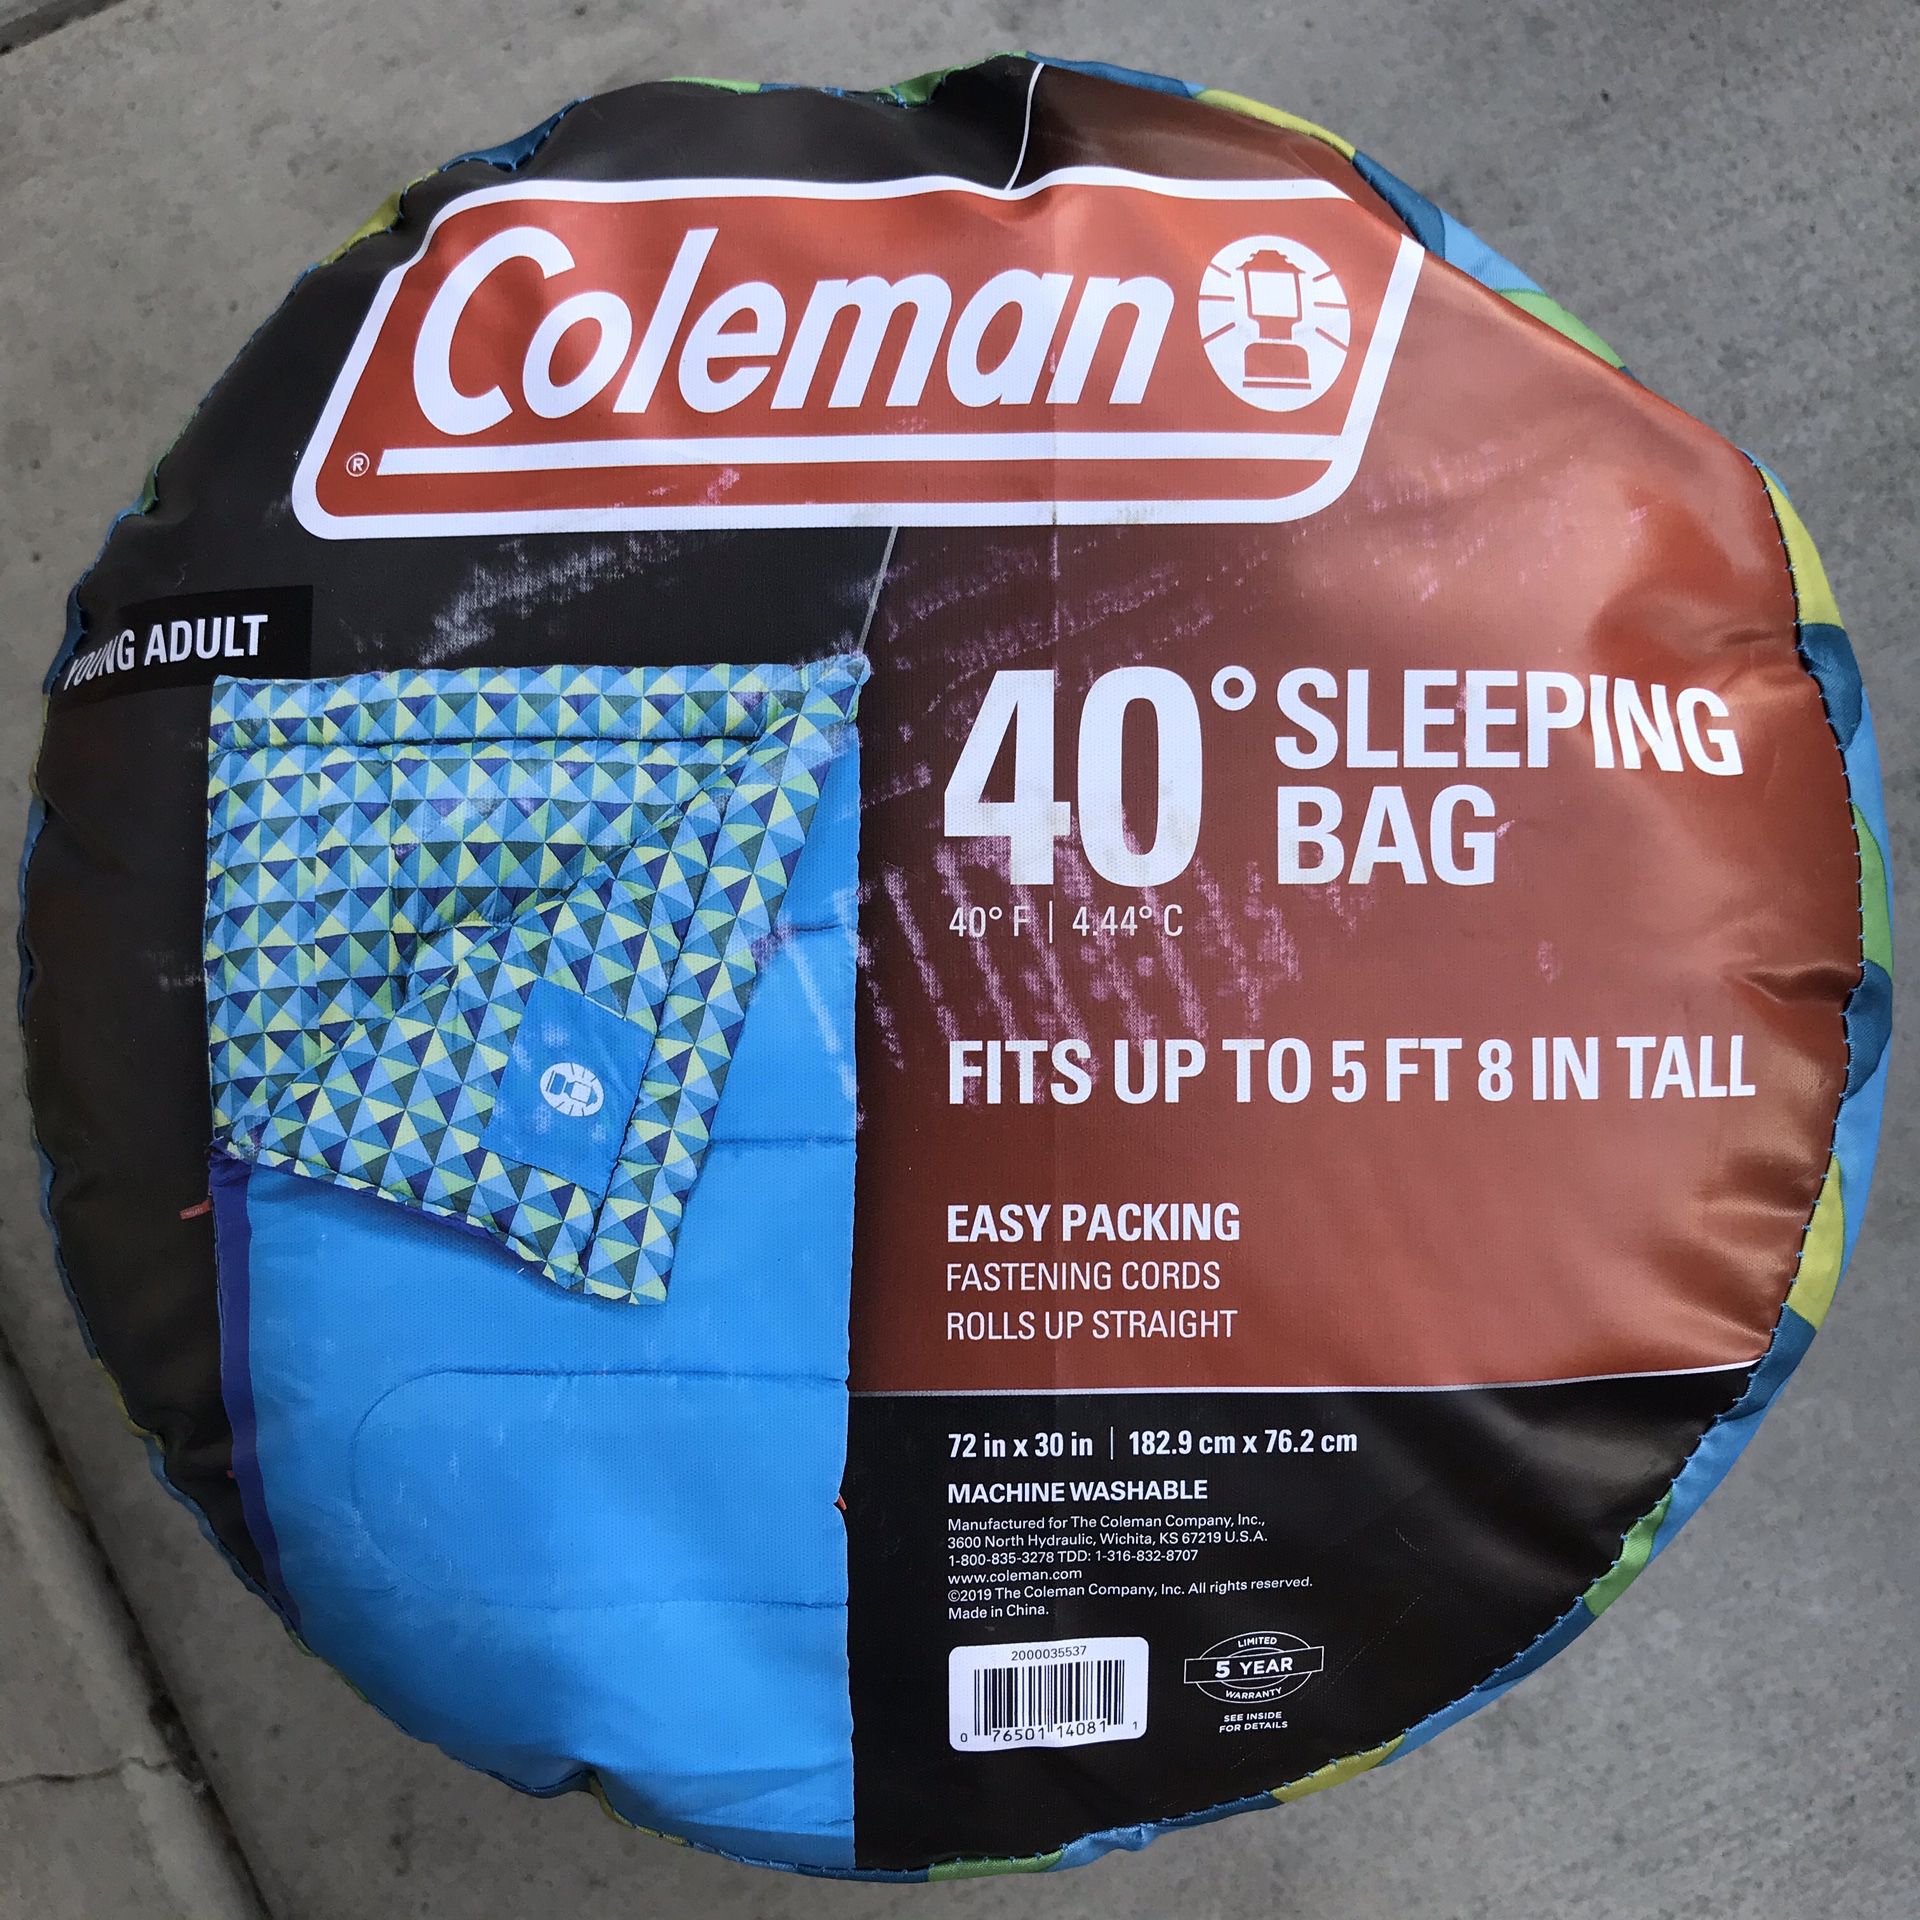 Brand New ! Price for 2 Adult 40 Degree & 50 Degree sleeping Bags Blue and Green Youth Adult Sleeping Bag ! Coleman Montrose Camping Equipment !